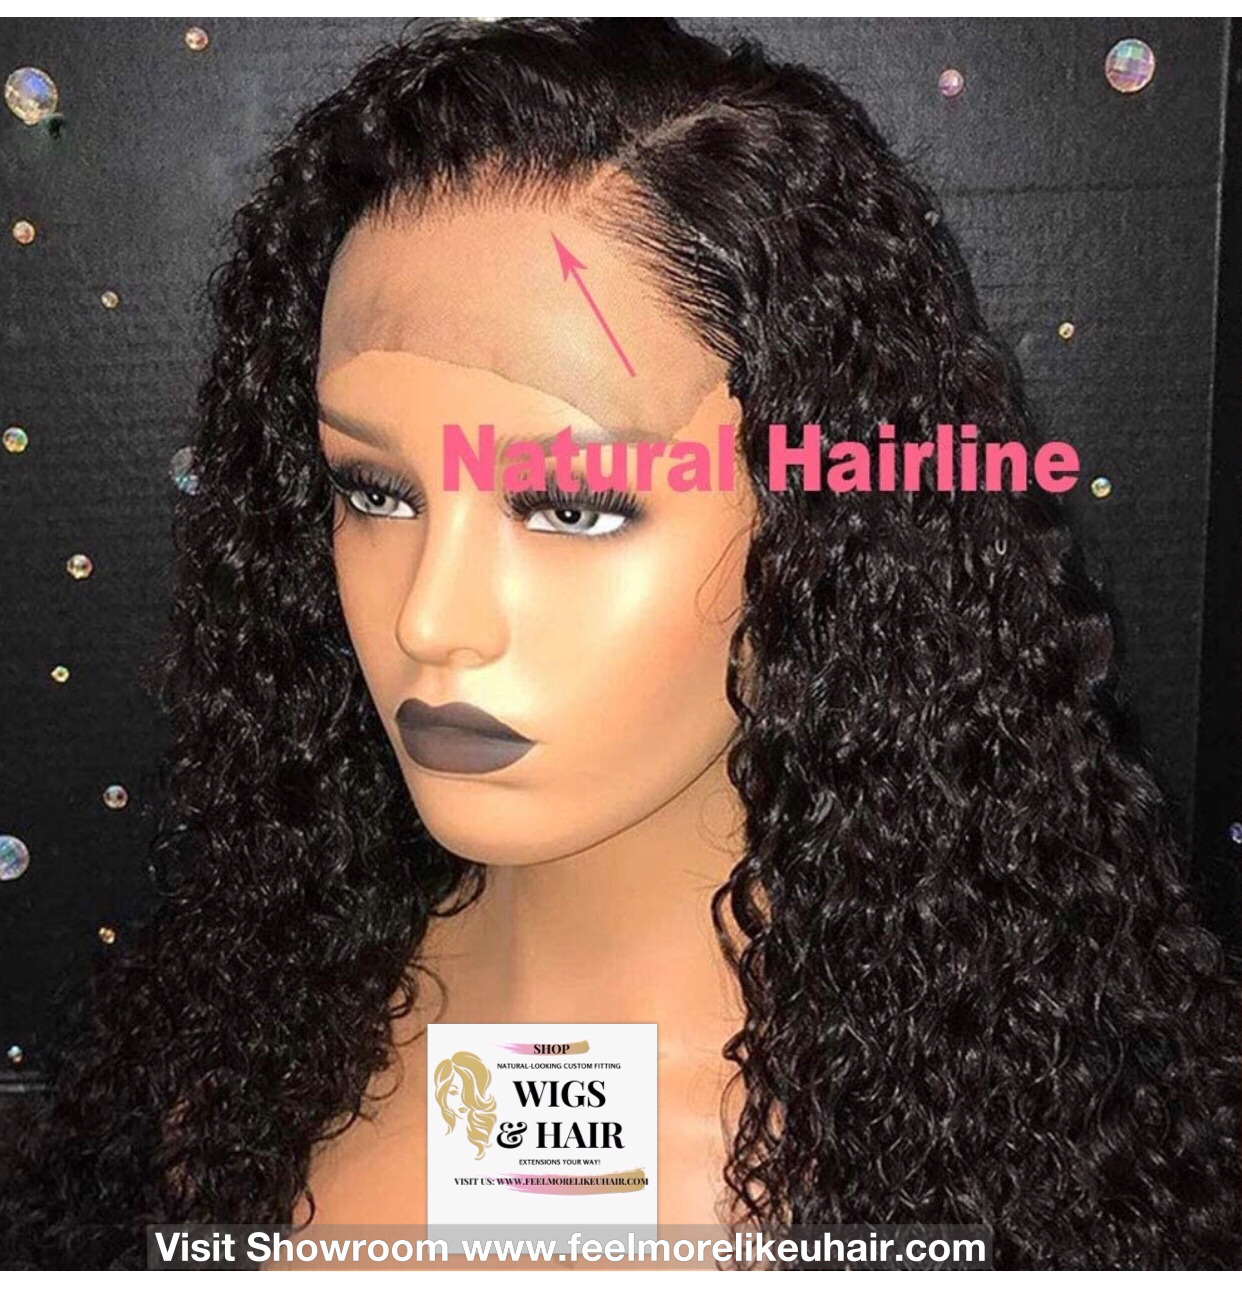 Full Lace Front Wig-Raw Cambodian Softkinks Curly Bob wig Visit Store www.feelmorelikeuhair.com 